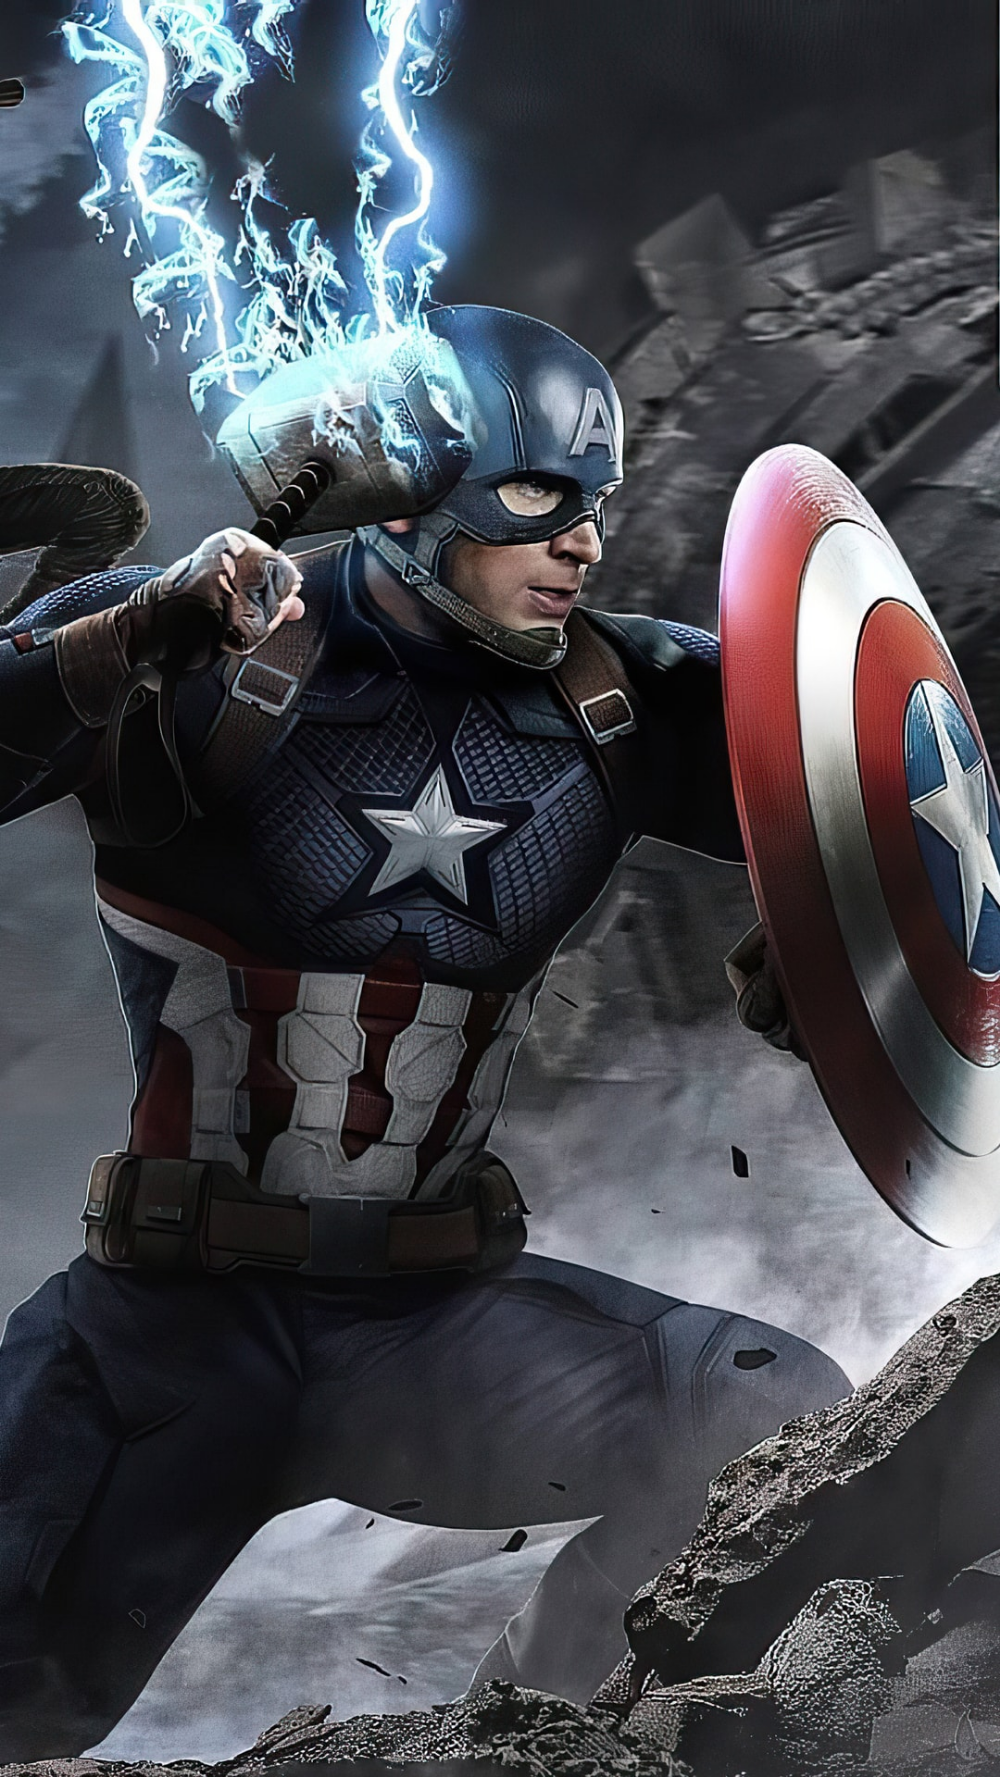 Captain America Avengers EndgameK wallpaper, free and easy to download. Movie night for kids, Captain america, The simpsons movie